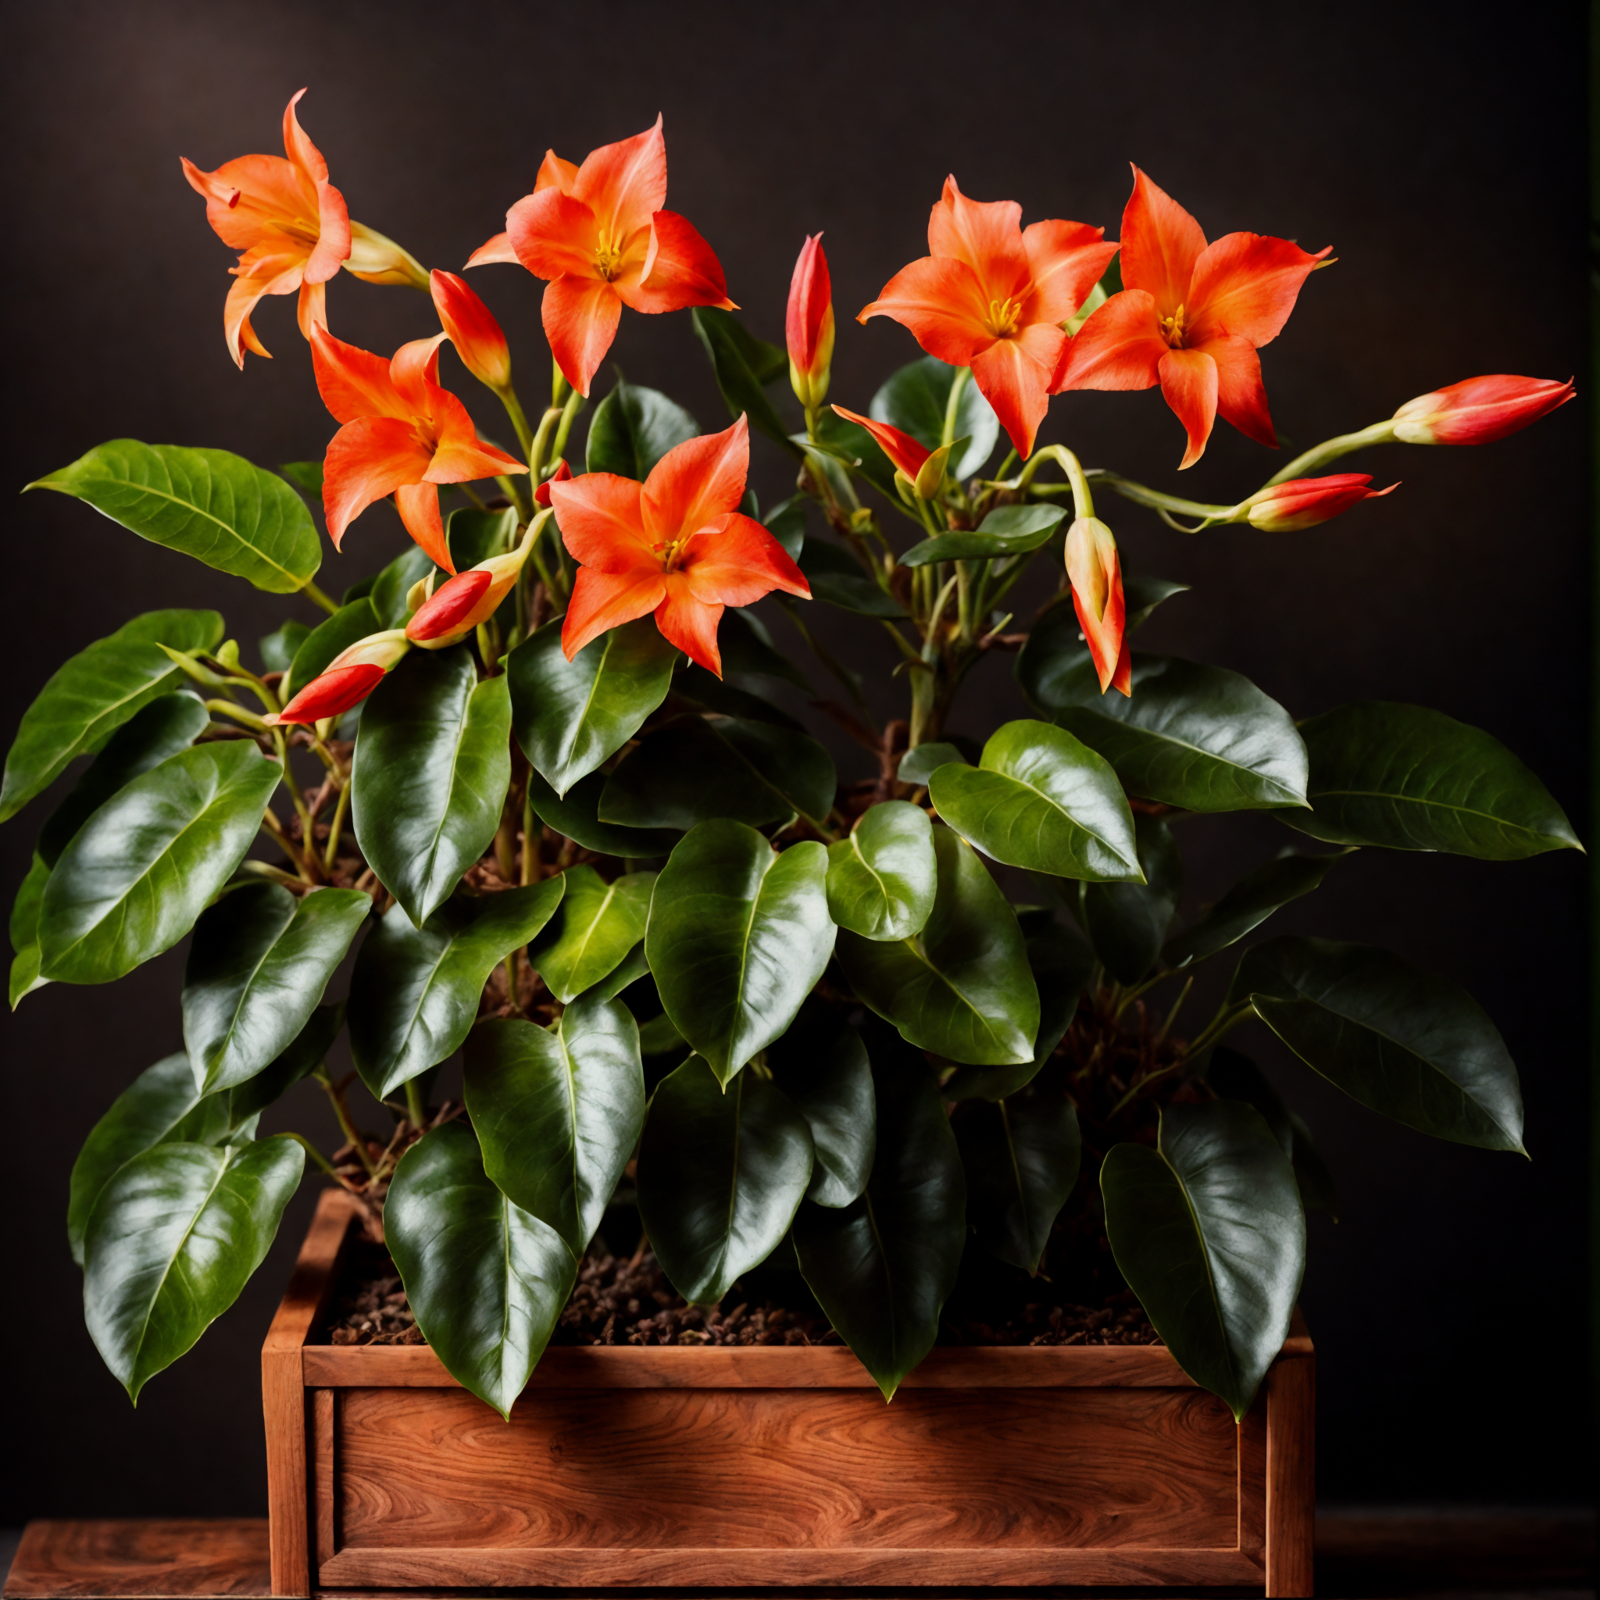 A vibrant Mandevilla sanderi with red blooms on a wooden table, clear lighting, and a dark backdrop.